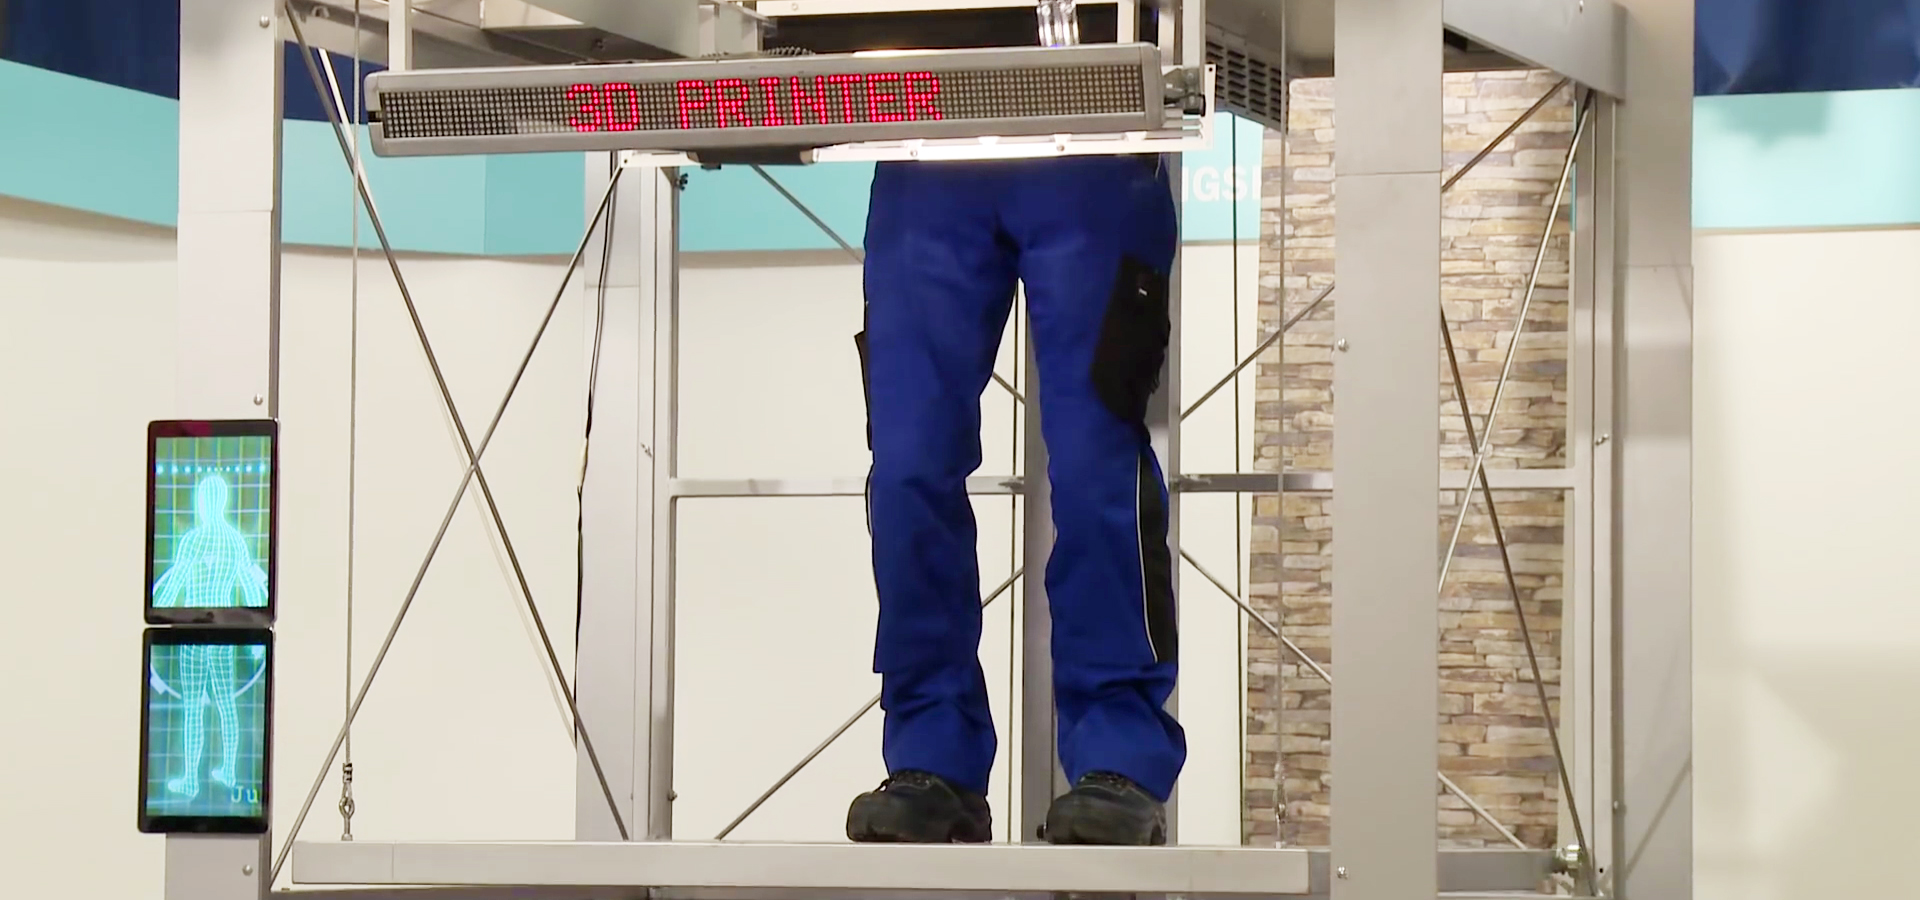 3D Printing Real People Is Scary | Hackaday